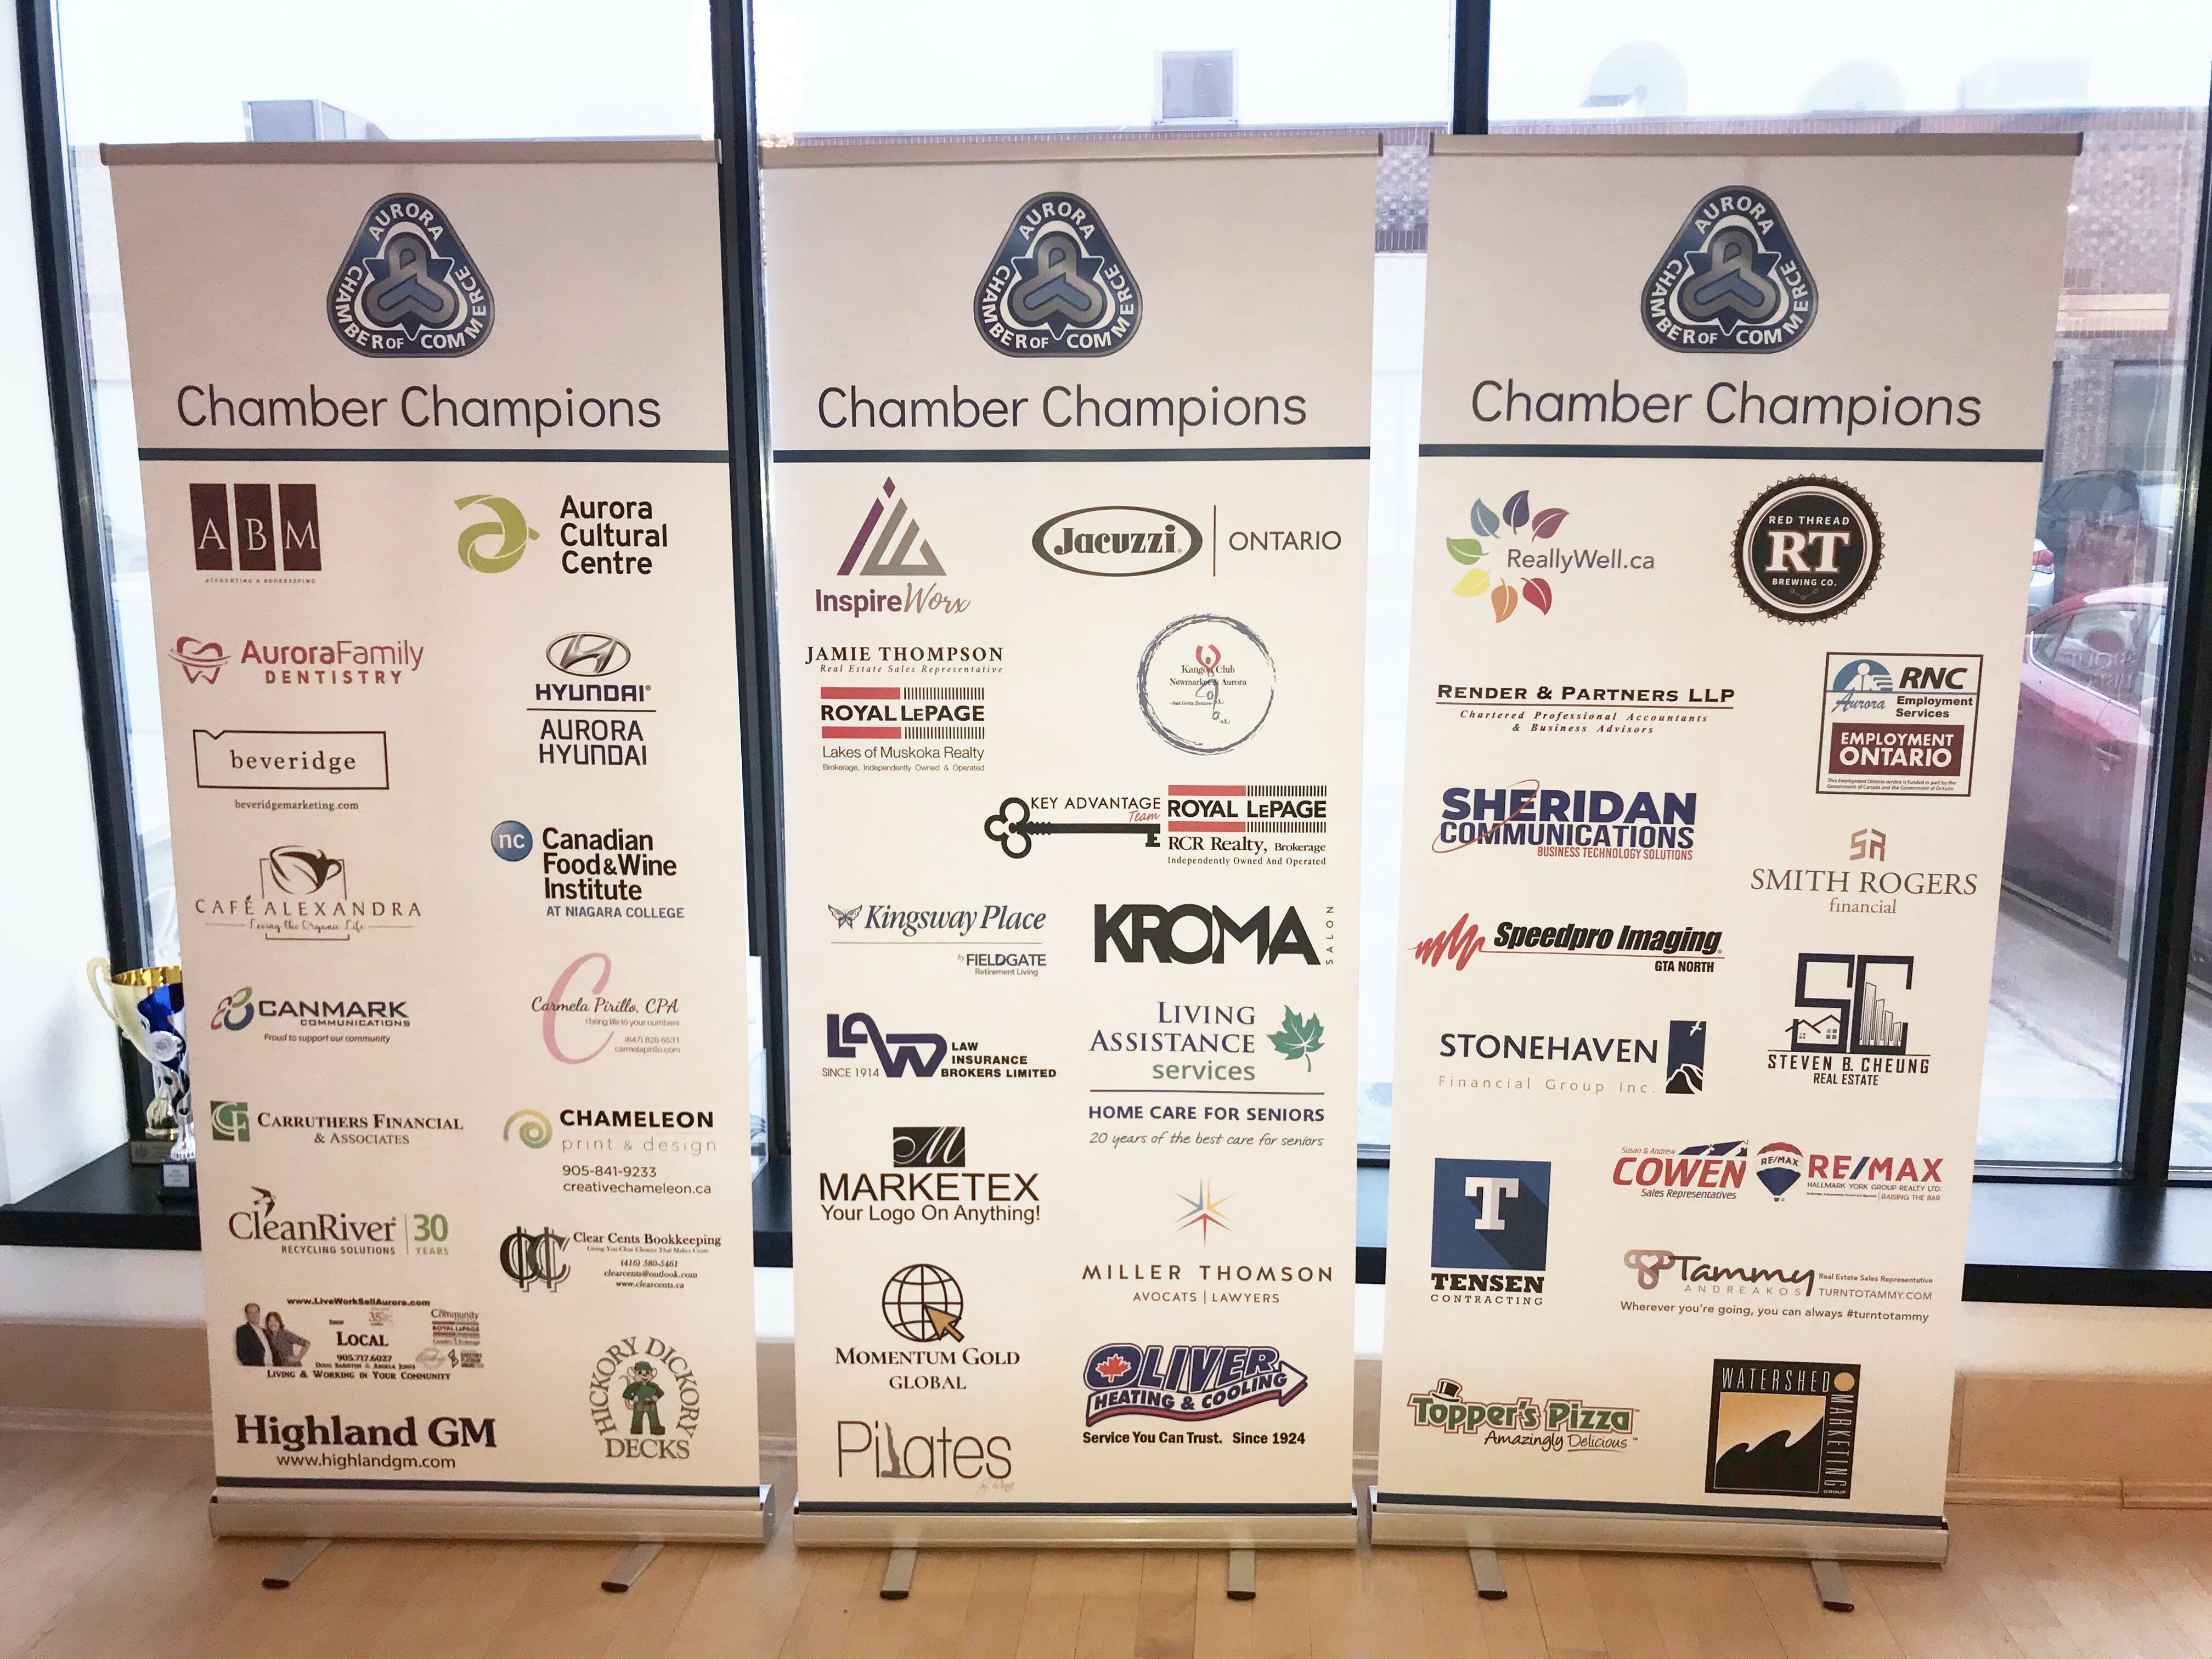 2020 Chamber Champions Banners (1)